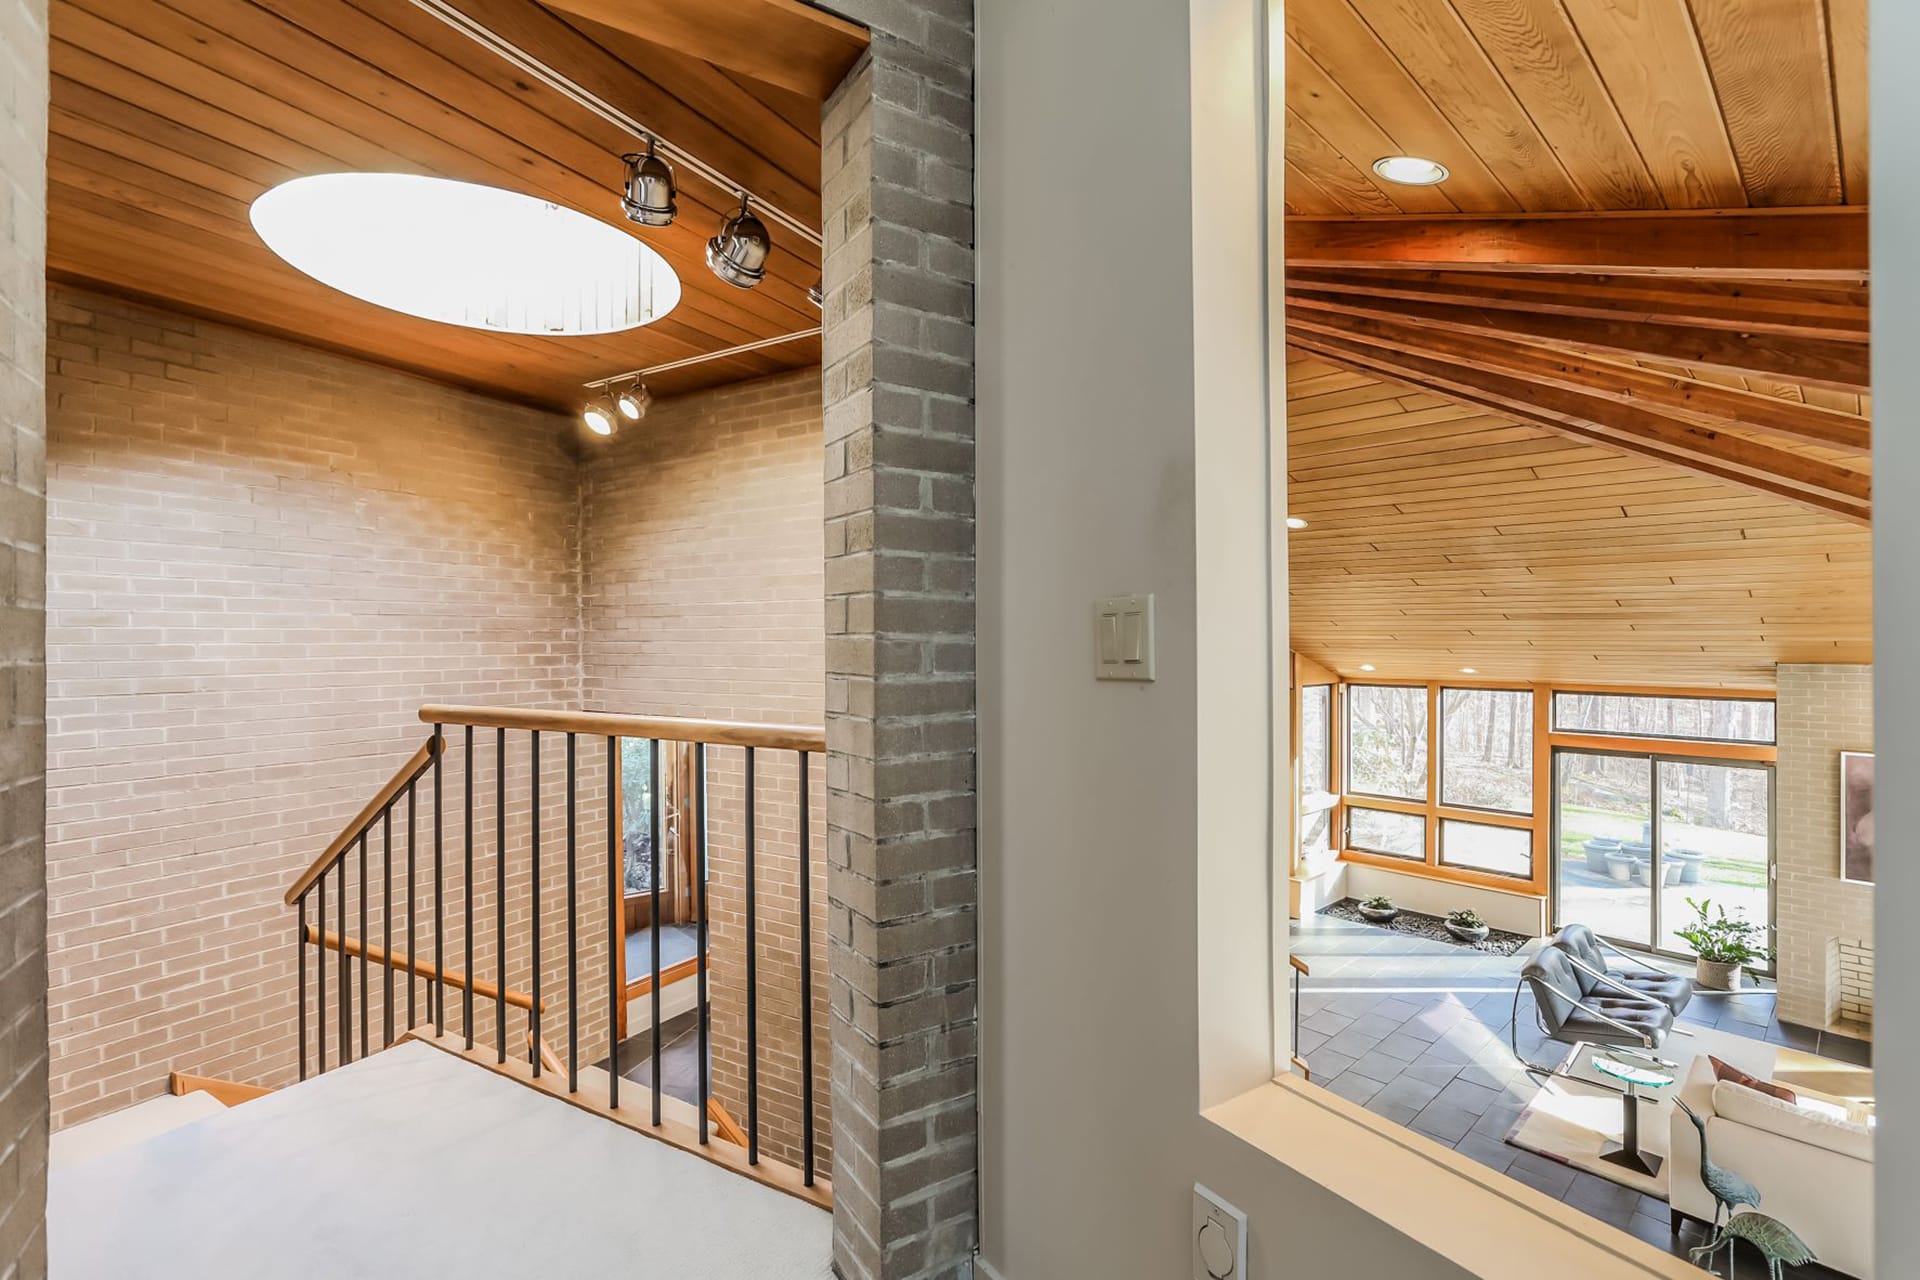 Upper level staircase landing with brick walls, wood paneled ceilings, and a skylight above